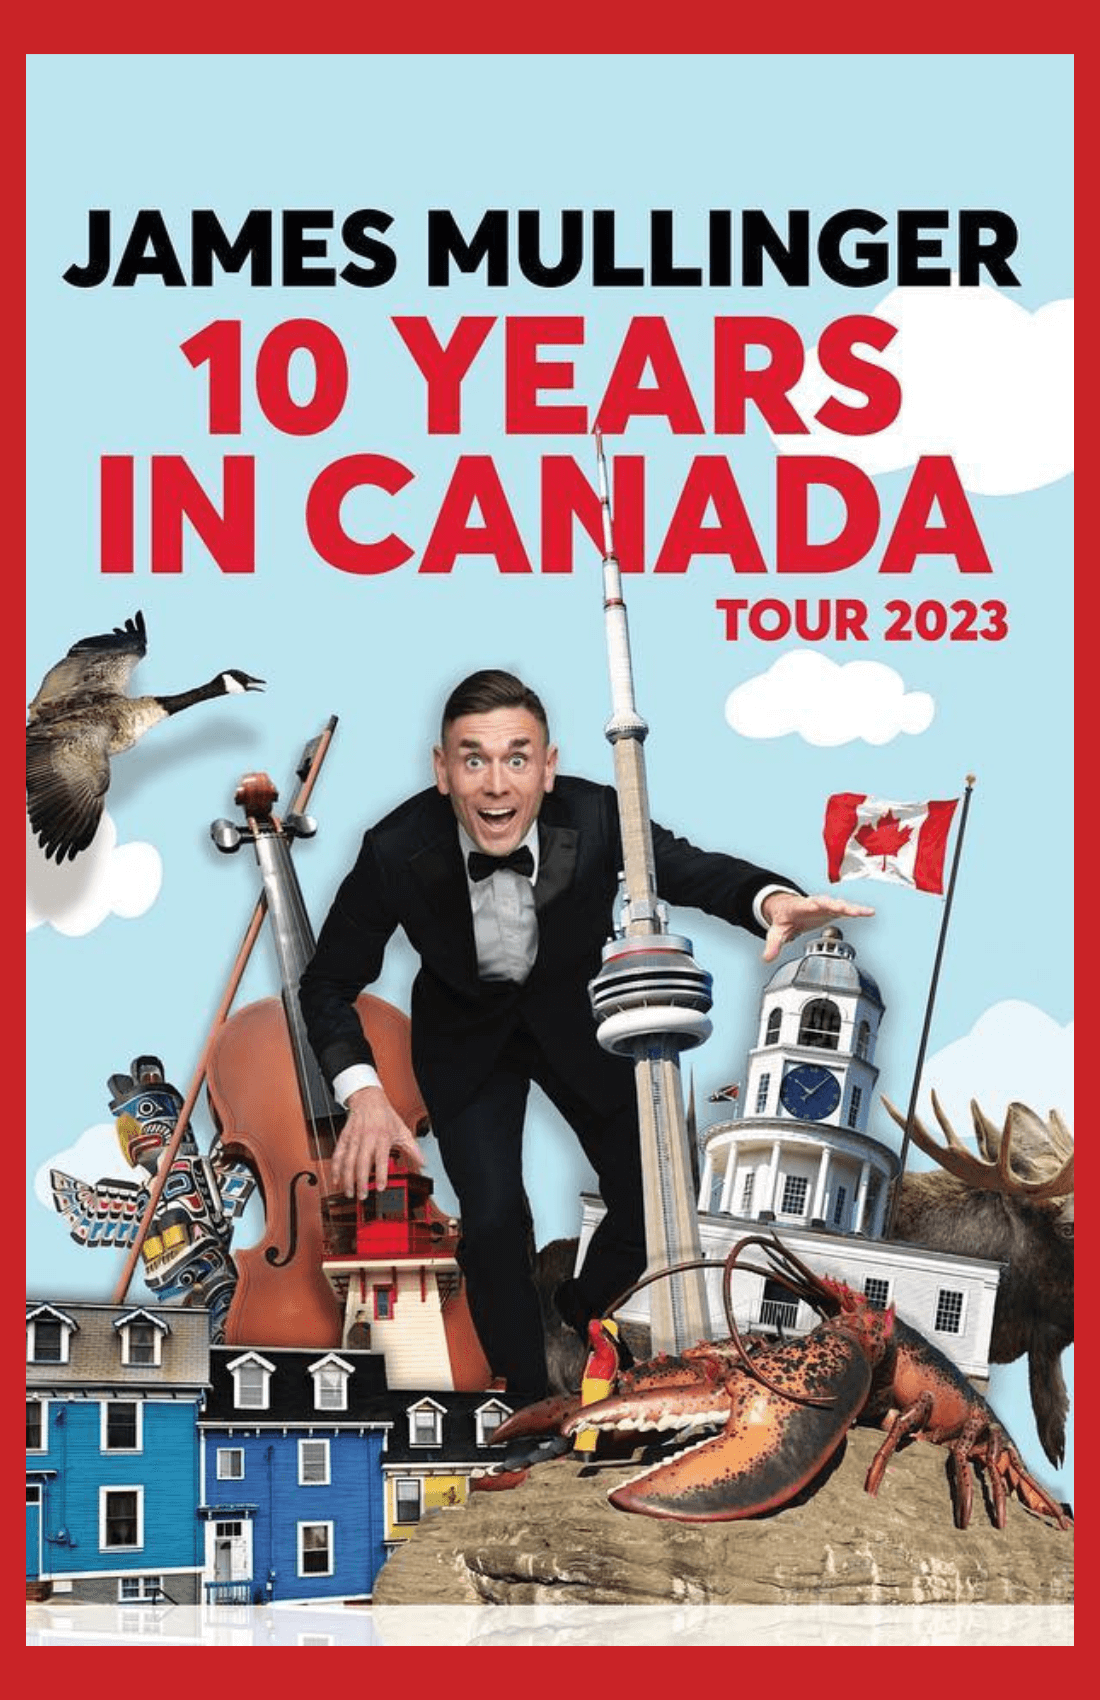 James Mullinger - 10 Years in Canada